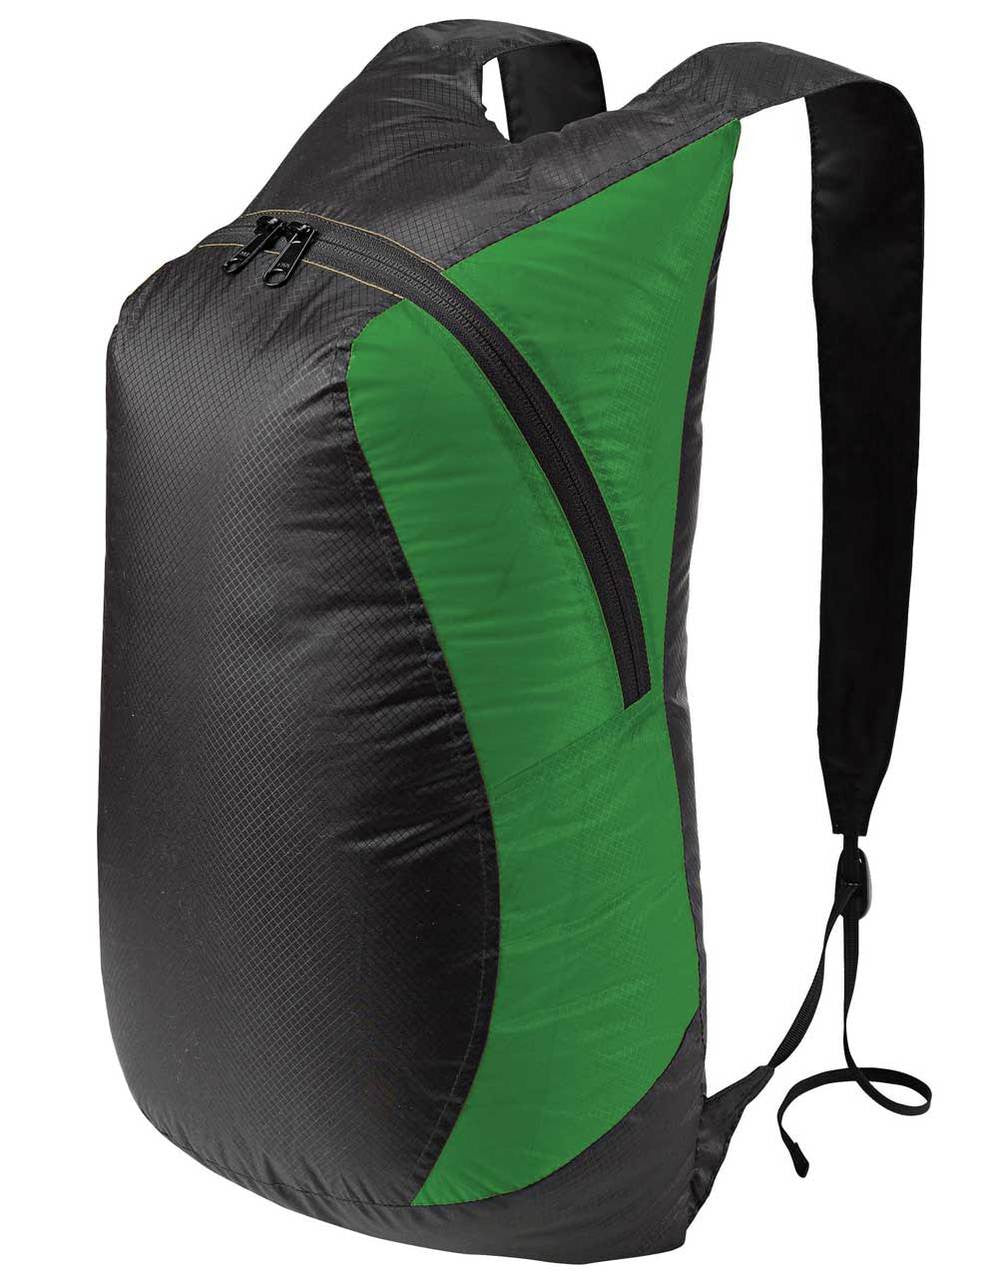 Sea to Summit Day Pack, Green/Black